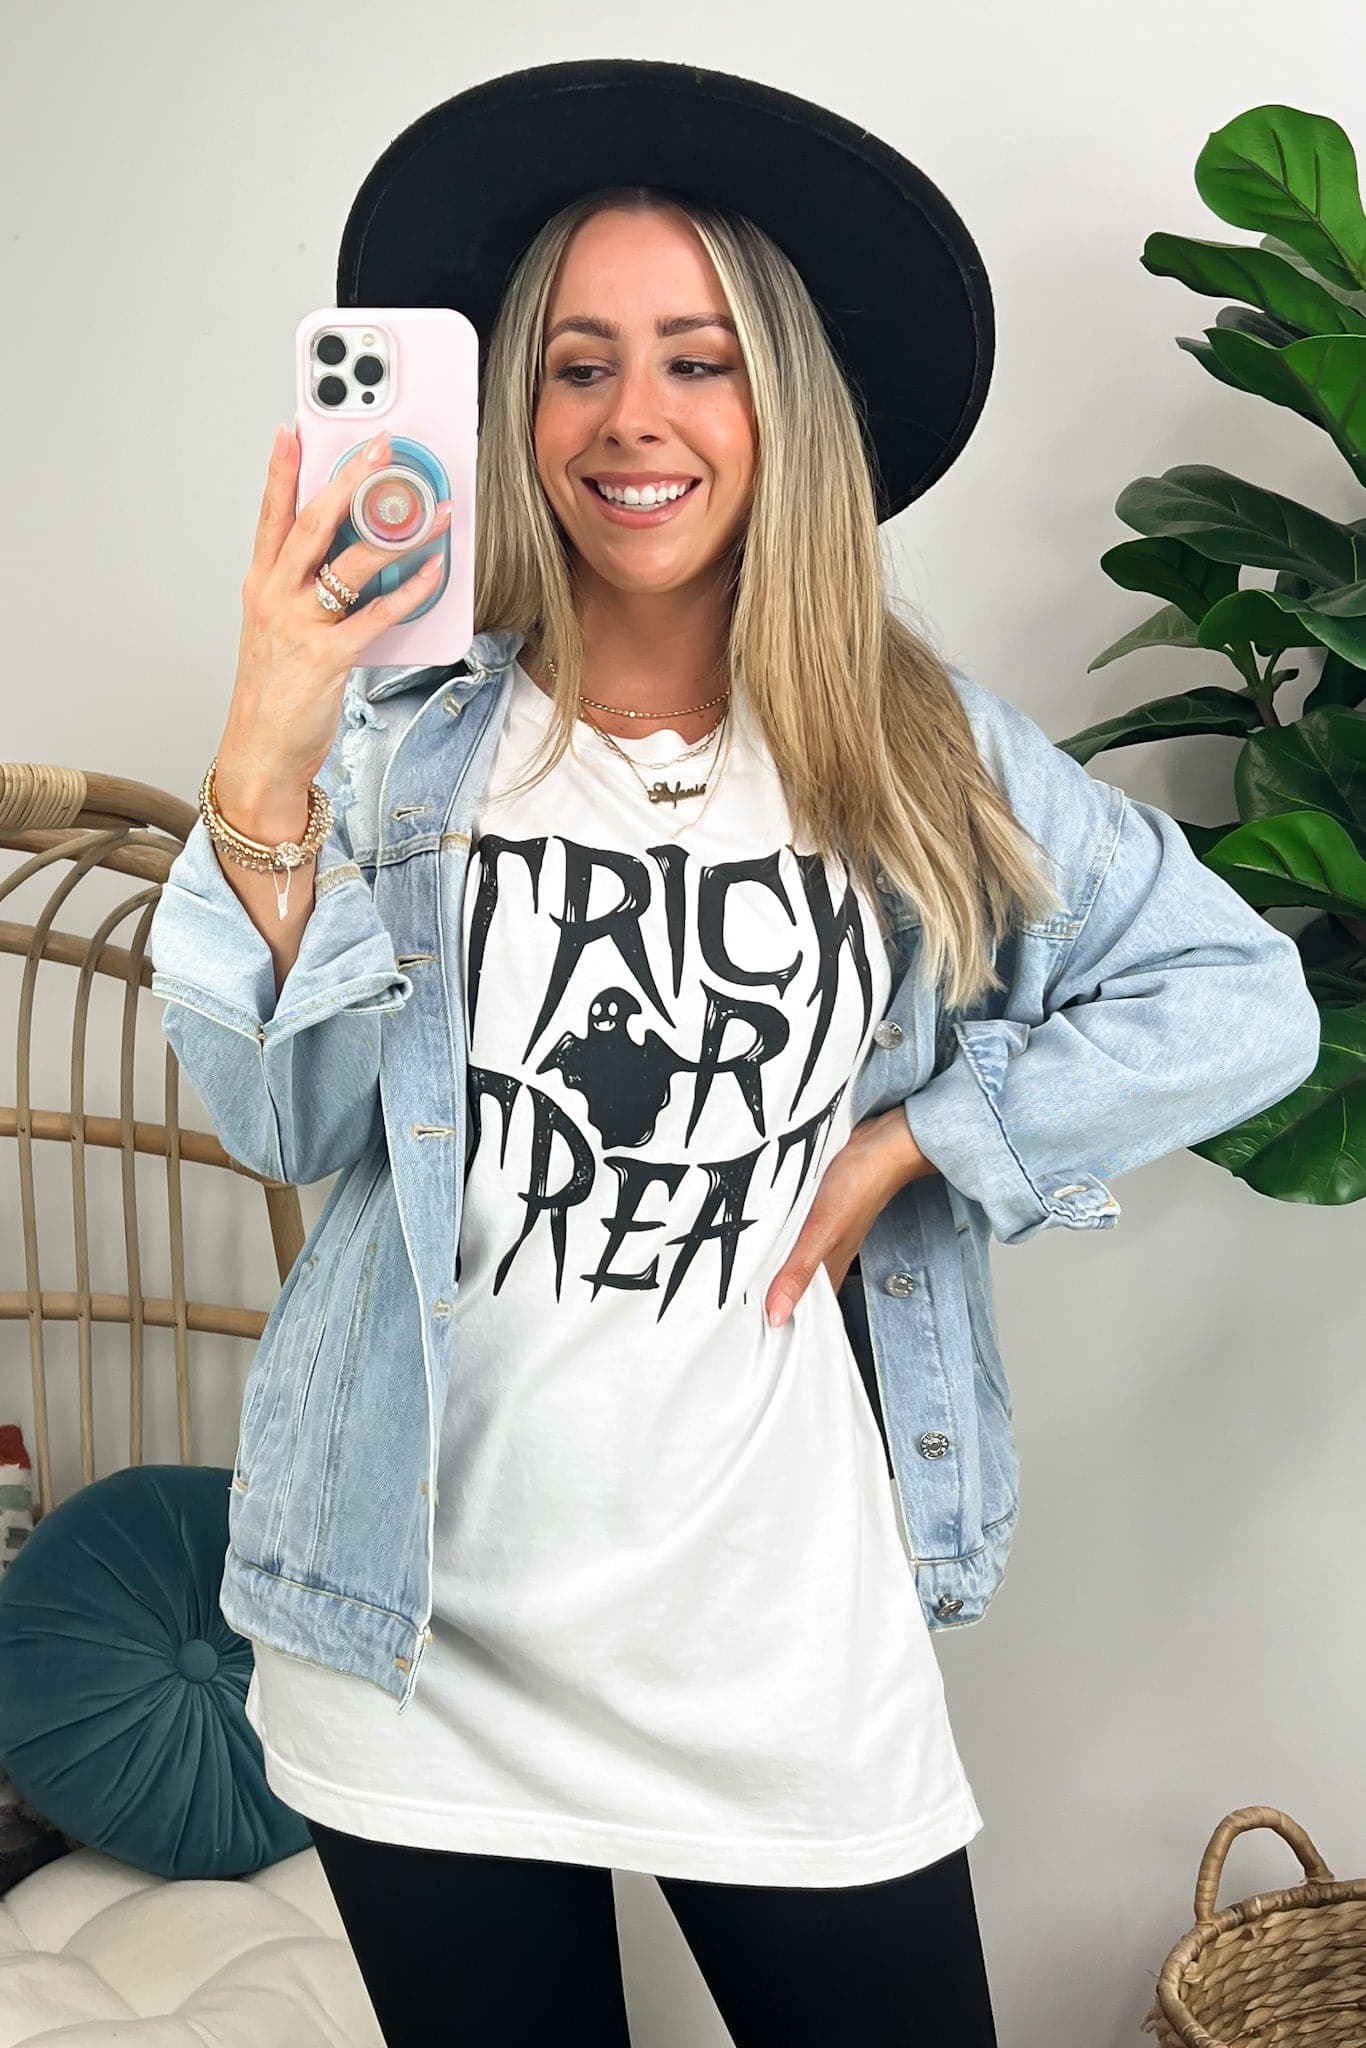  Trick or Treat Oversized Graphic Tee - FINAL SALE - Madison and Mallory